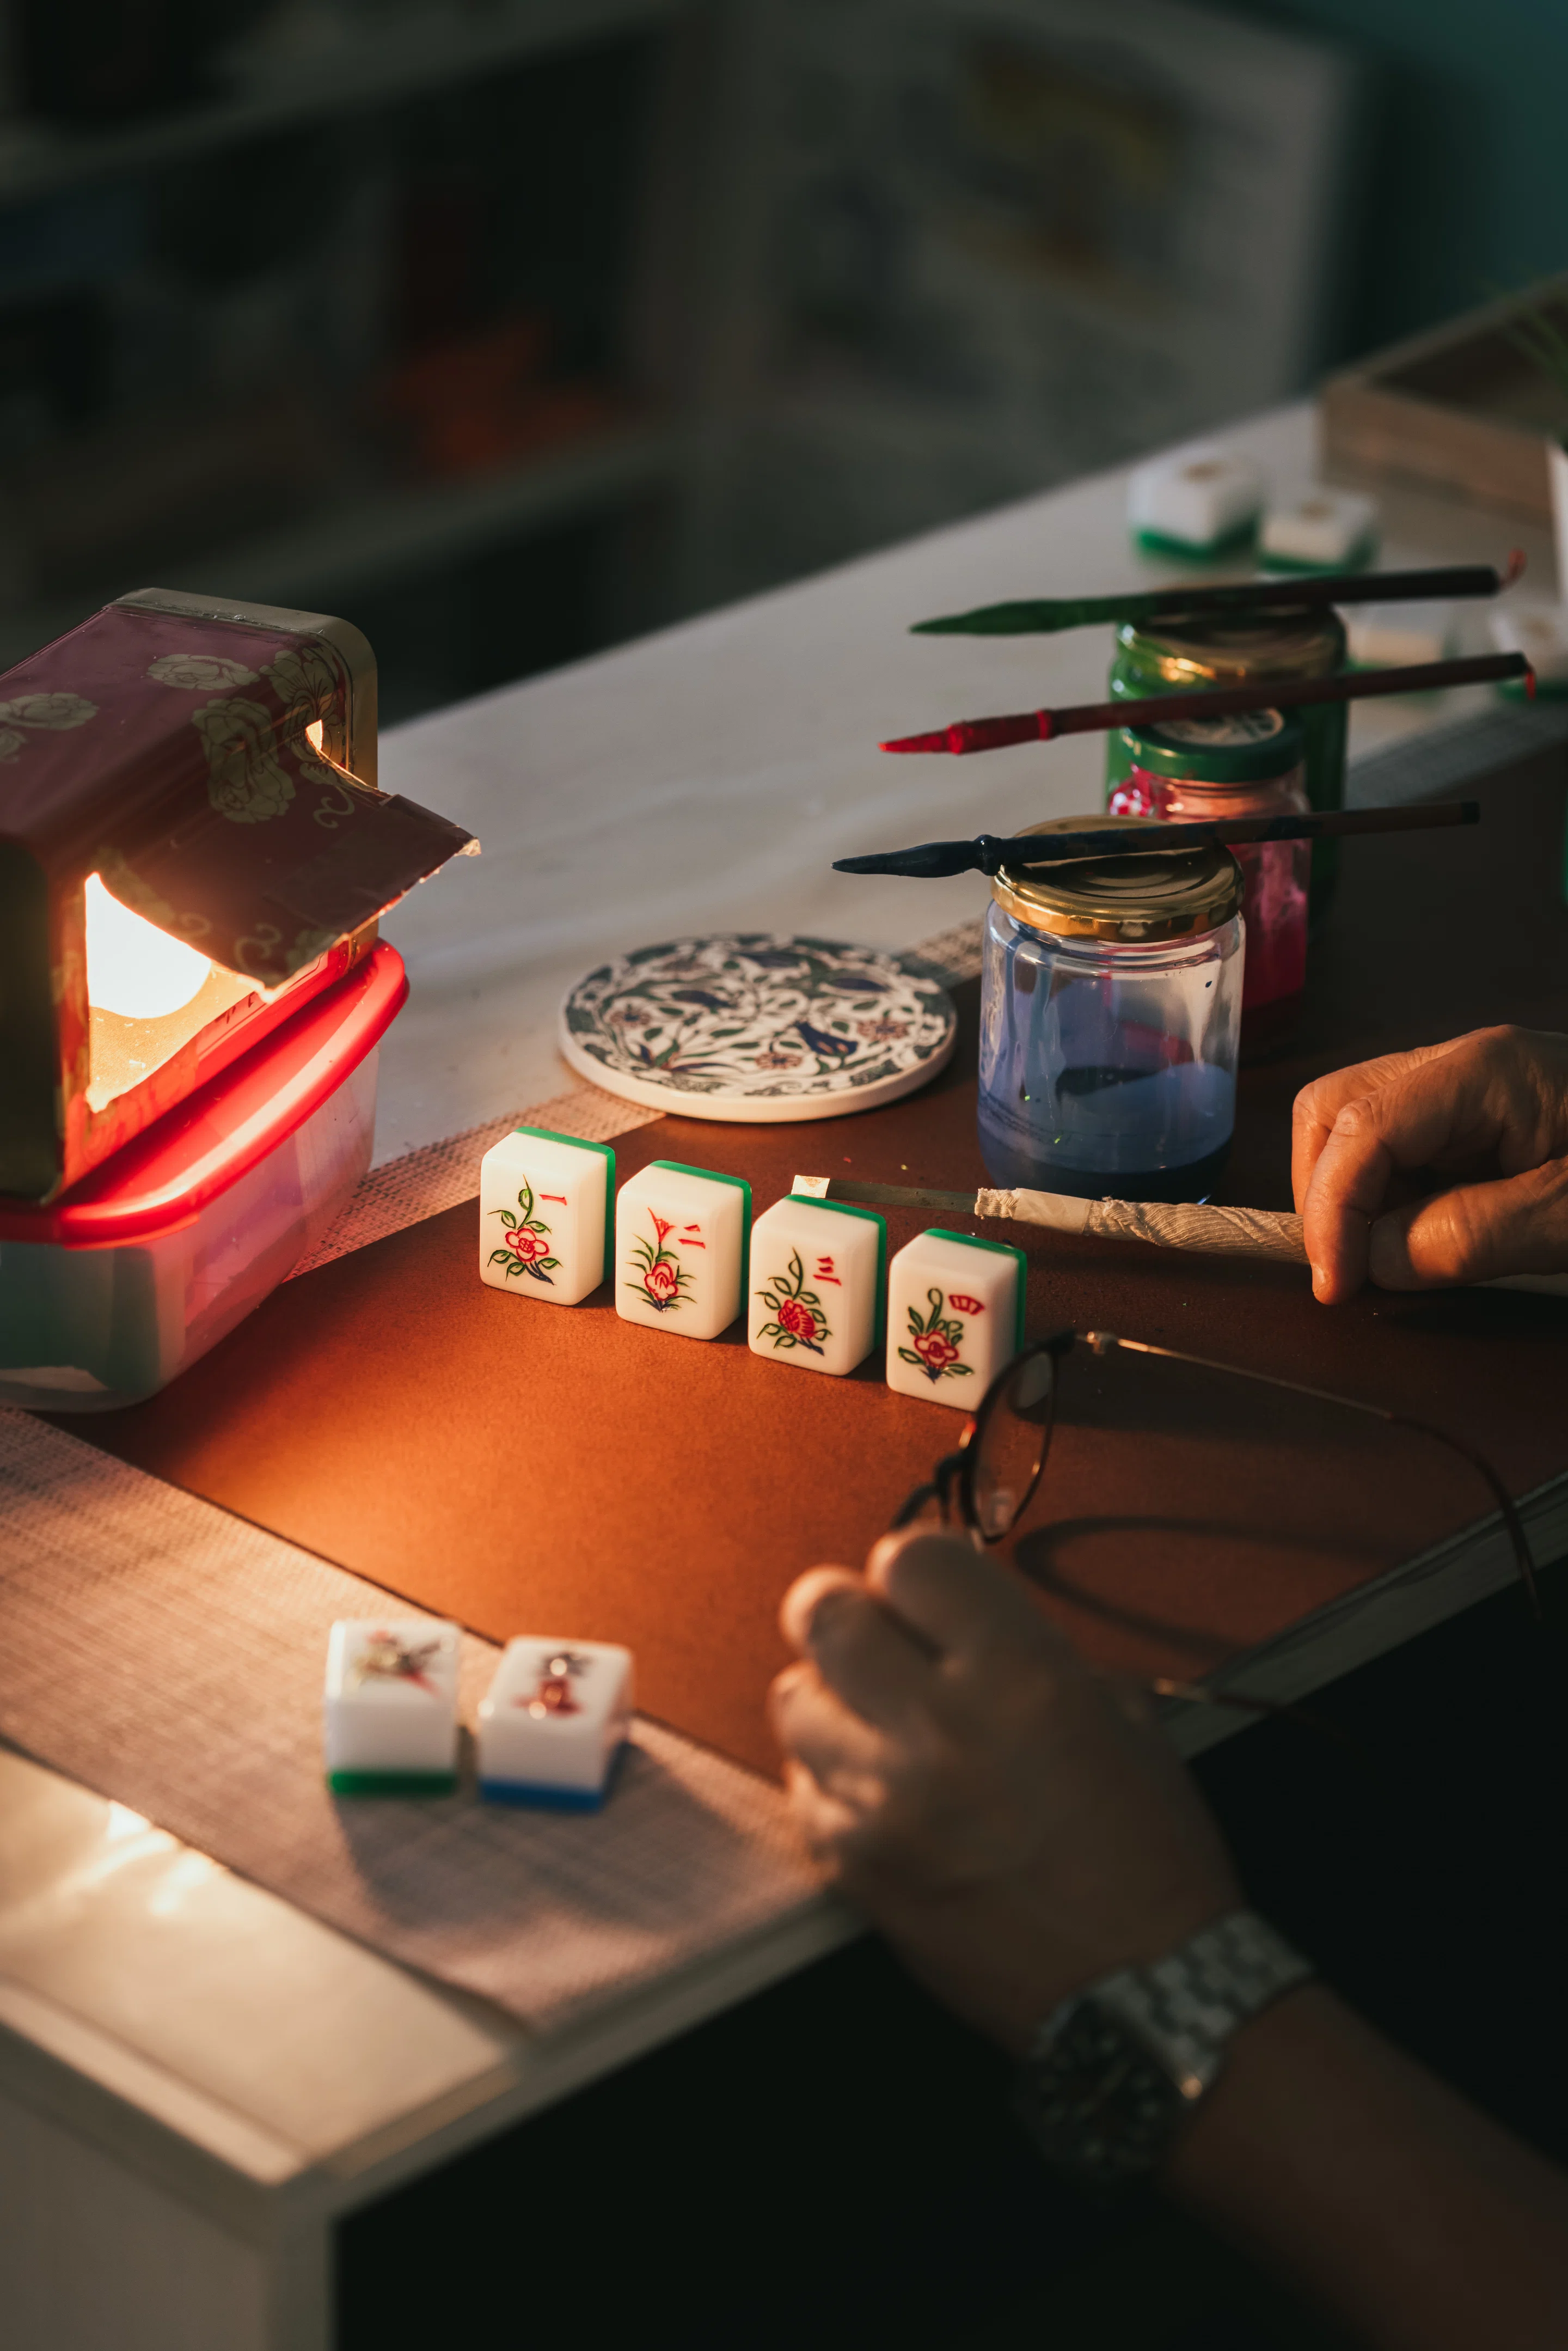 It's a dying art”: Behind the scenes with master Mahjong craftsman Ricky  Cheung